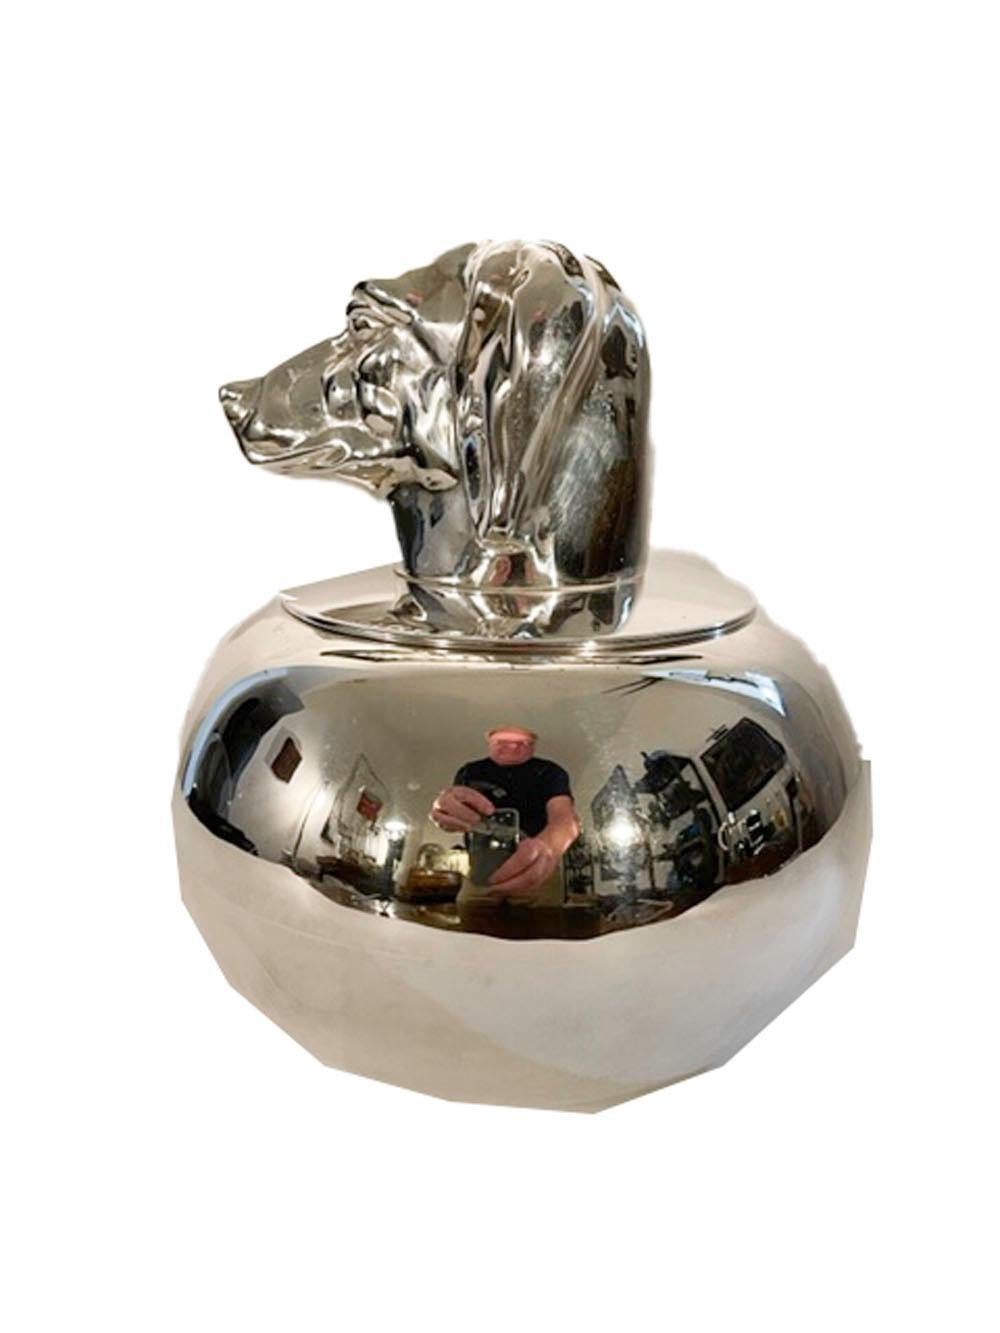 Spanish Vintage Silver Plate Ice Bucket with a Full Model of a Dog Head on the Cover